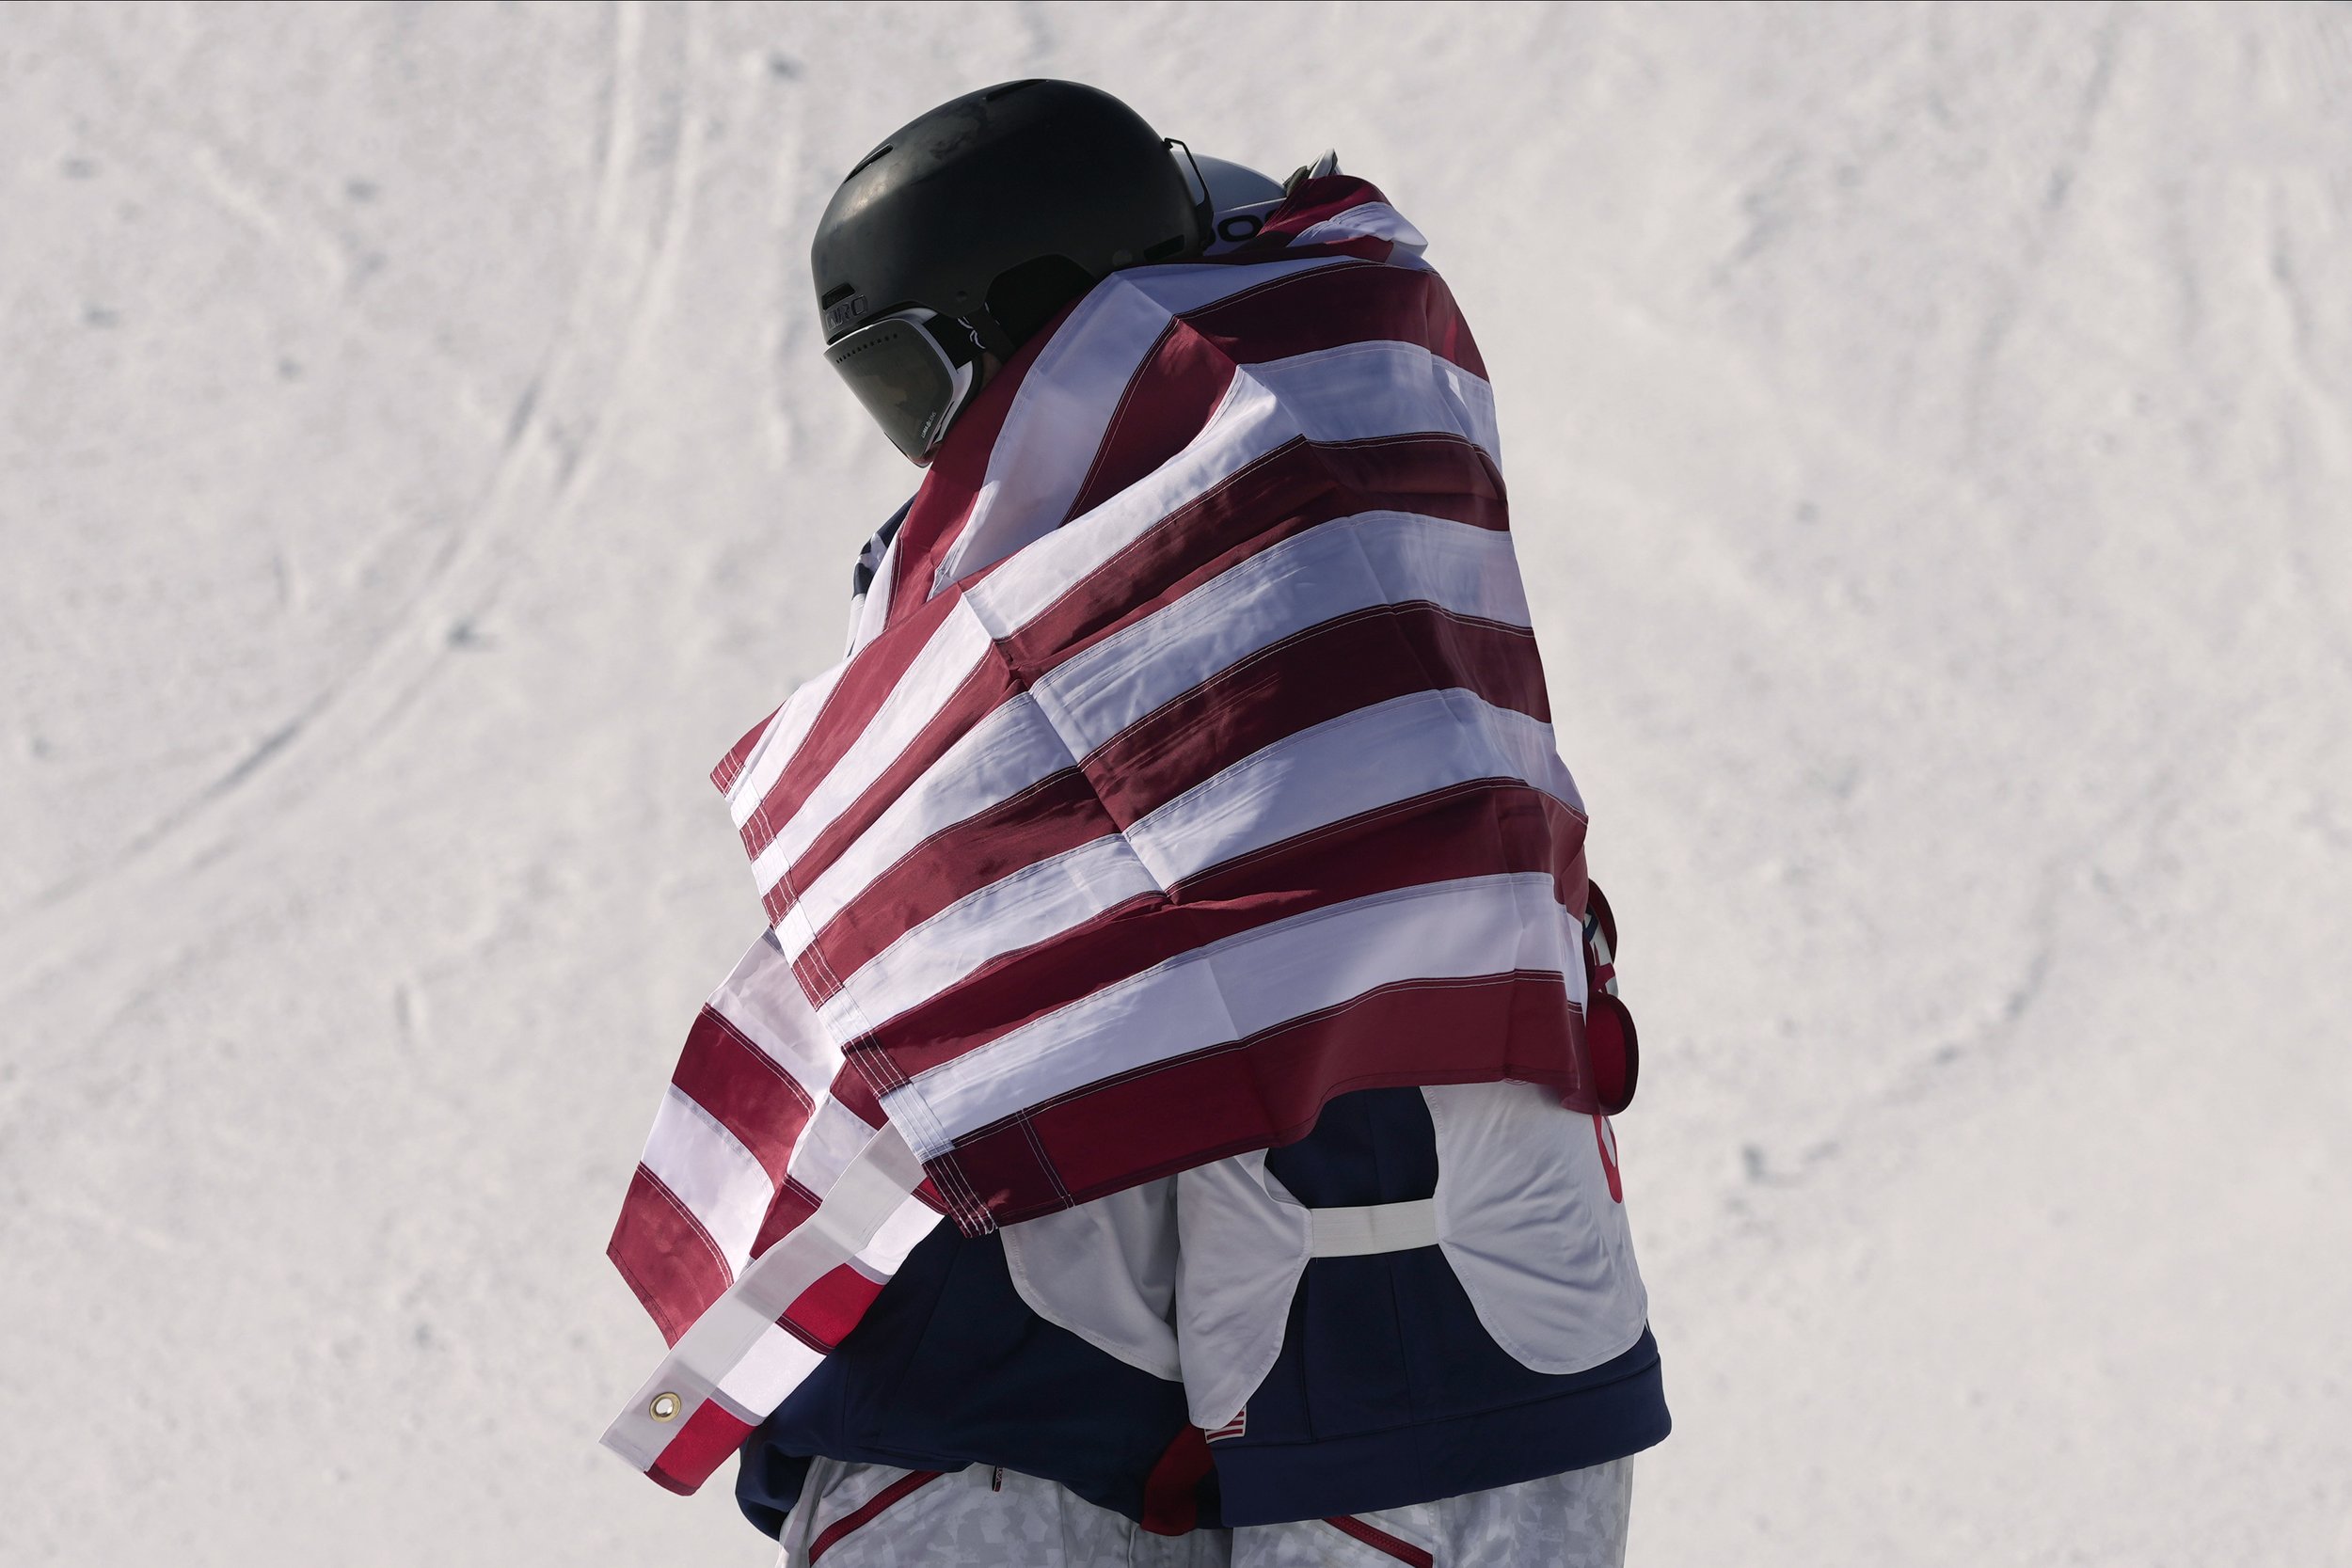  Gold medal winner United States' Alexander Hall, right, hugs silver medal winner United State's Nick Goepper as they celebrate after the men's slopestyle finals at the 2022 Winter Olympics, Wednesday, Feb. 16, 2022, in Zhangjiakou, China. (AP Photo/